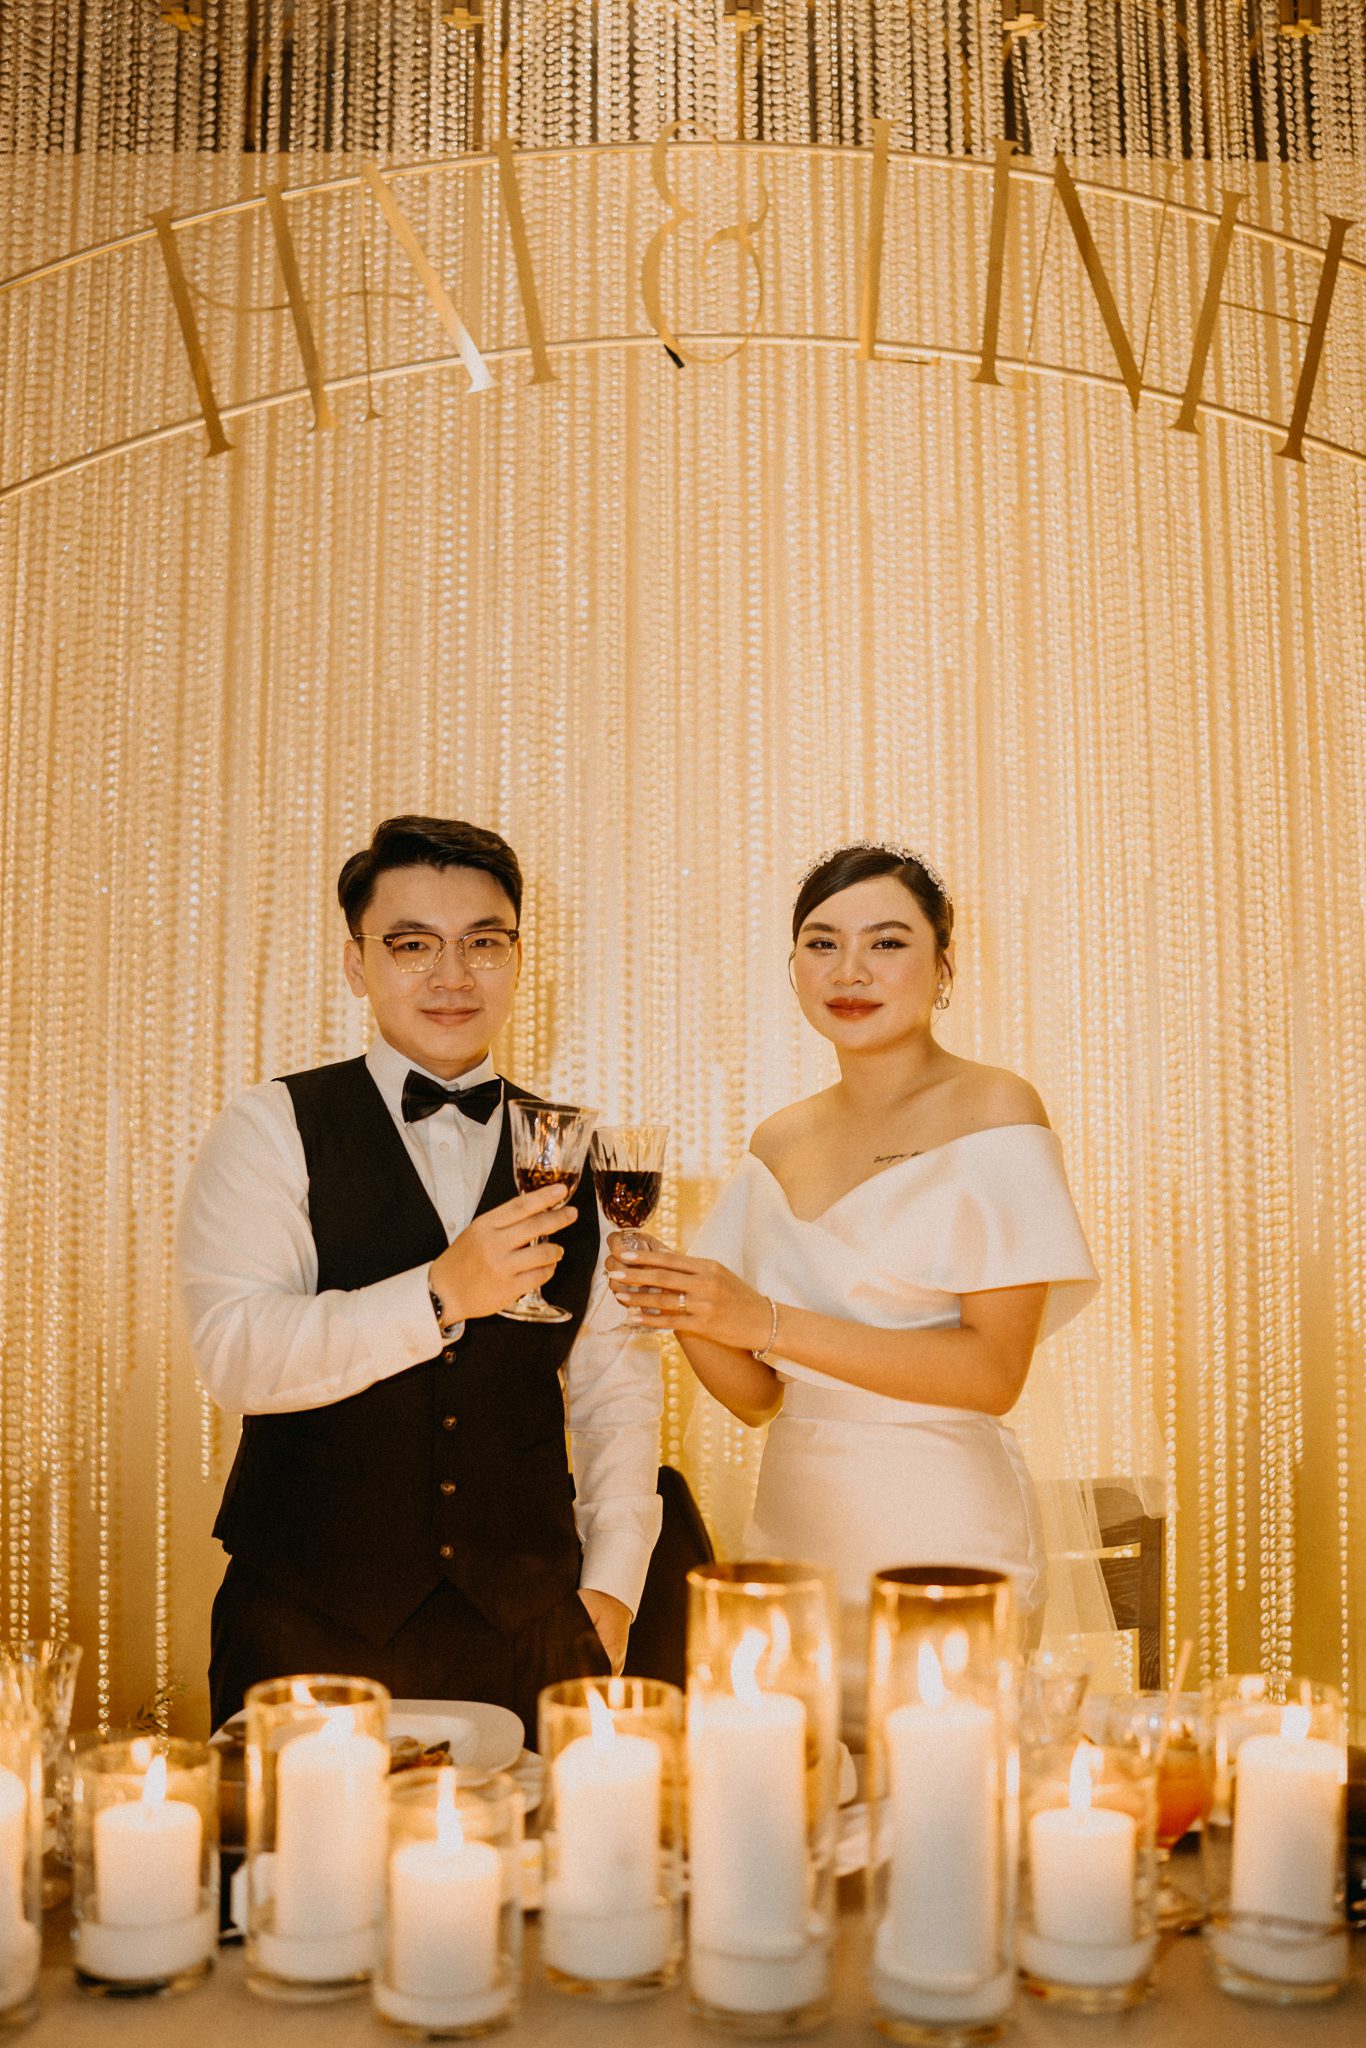 Saigon intimate wedding at An Lam Retreat 01265 - The Planners